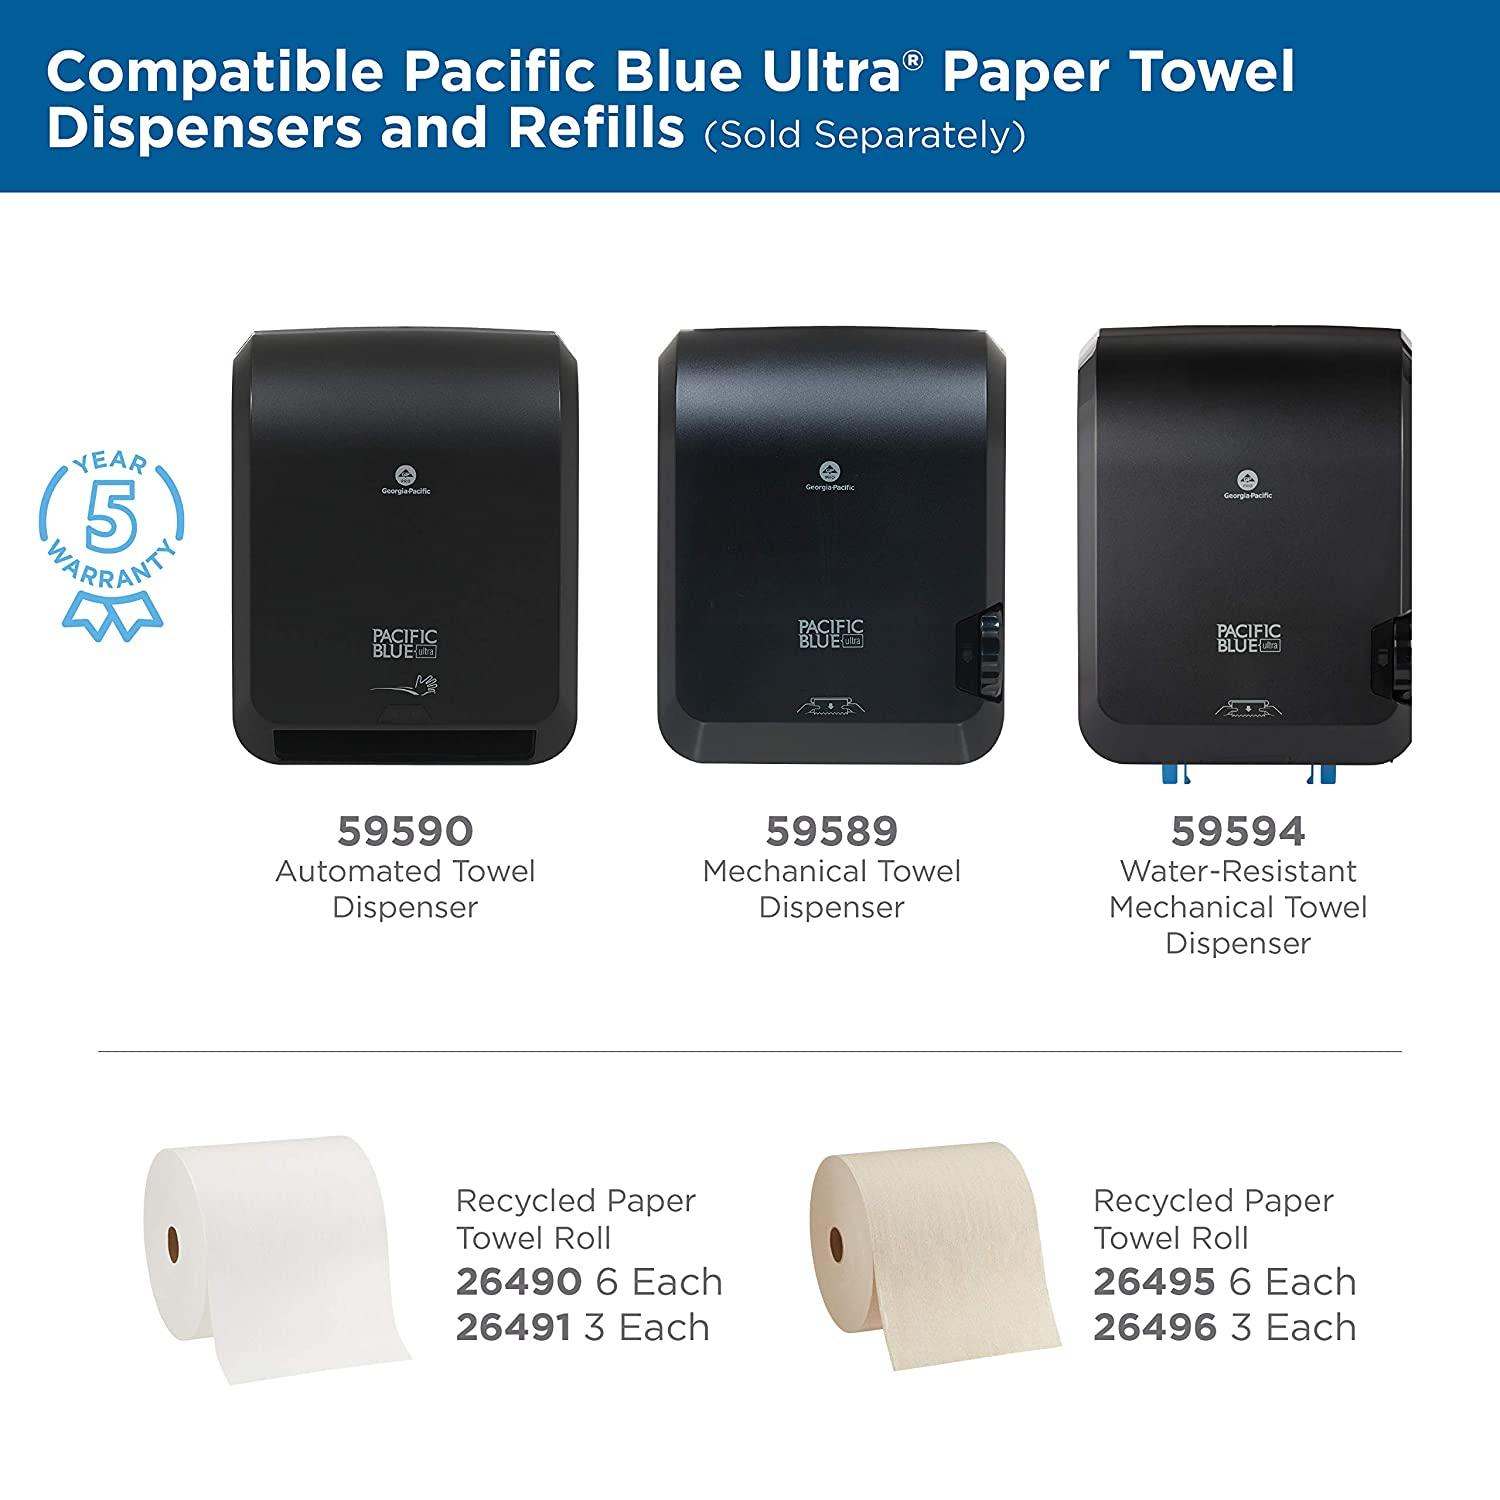 Pacific Blue Ultra 8 High-Capacity Recycled Paper Towel Rolls by GP PRO ...